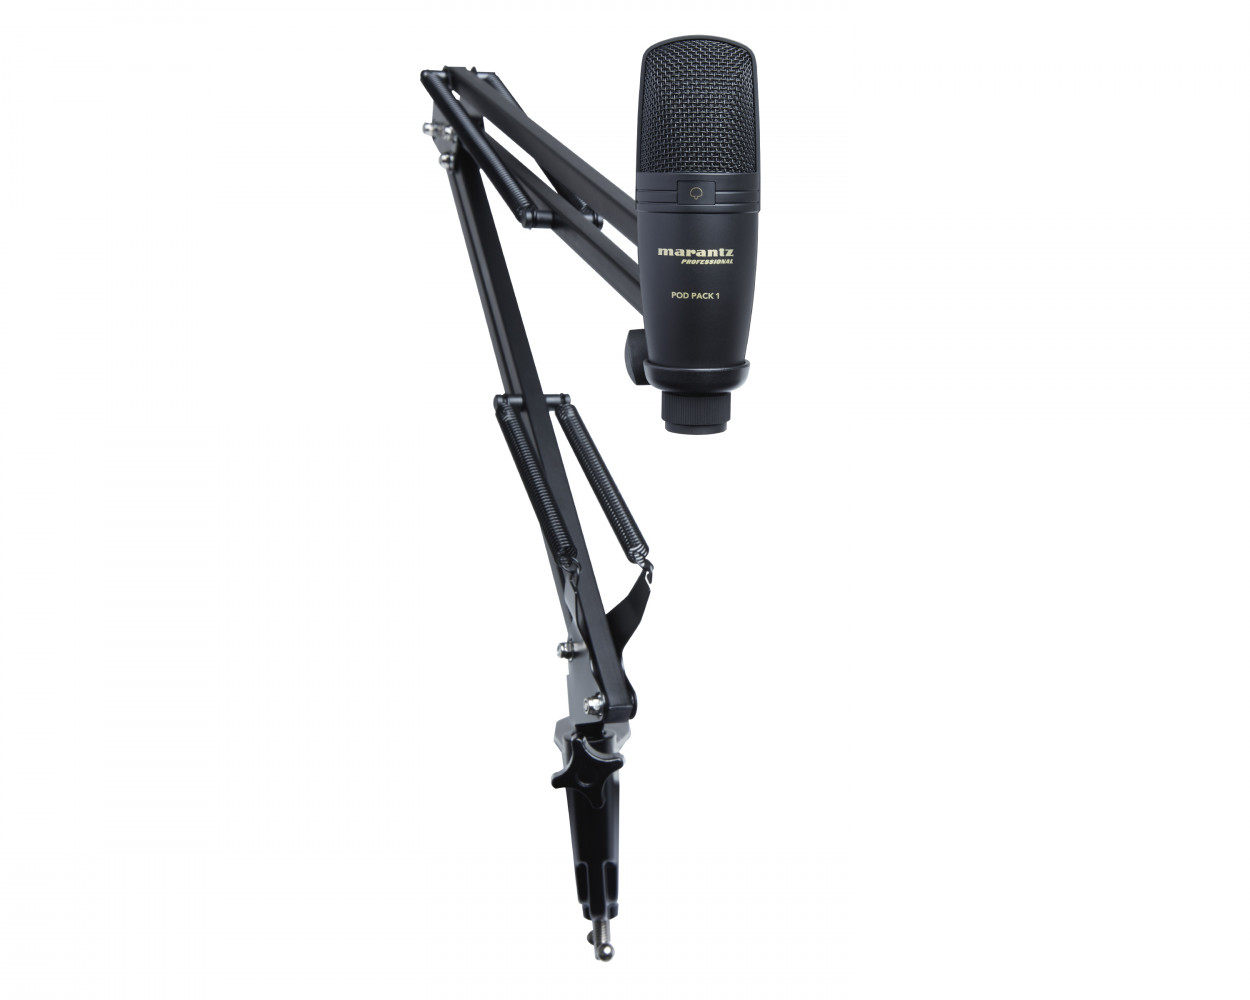 Marantz Professional Pod Pack 1 USB Microphone with Broadcast Stand & Cable